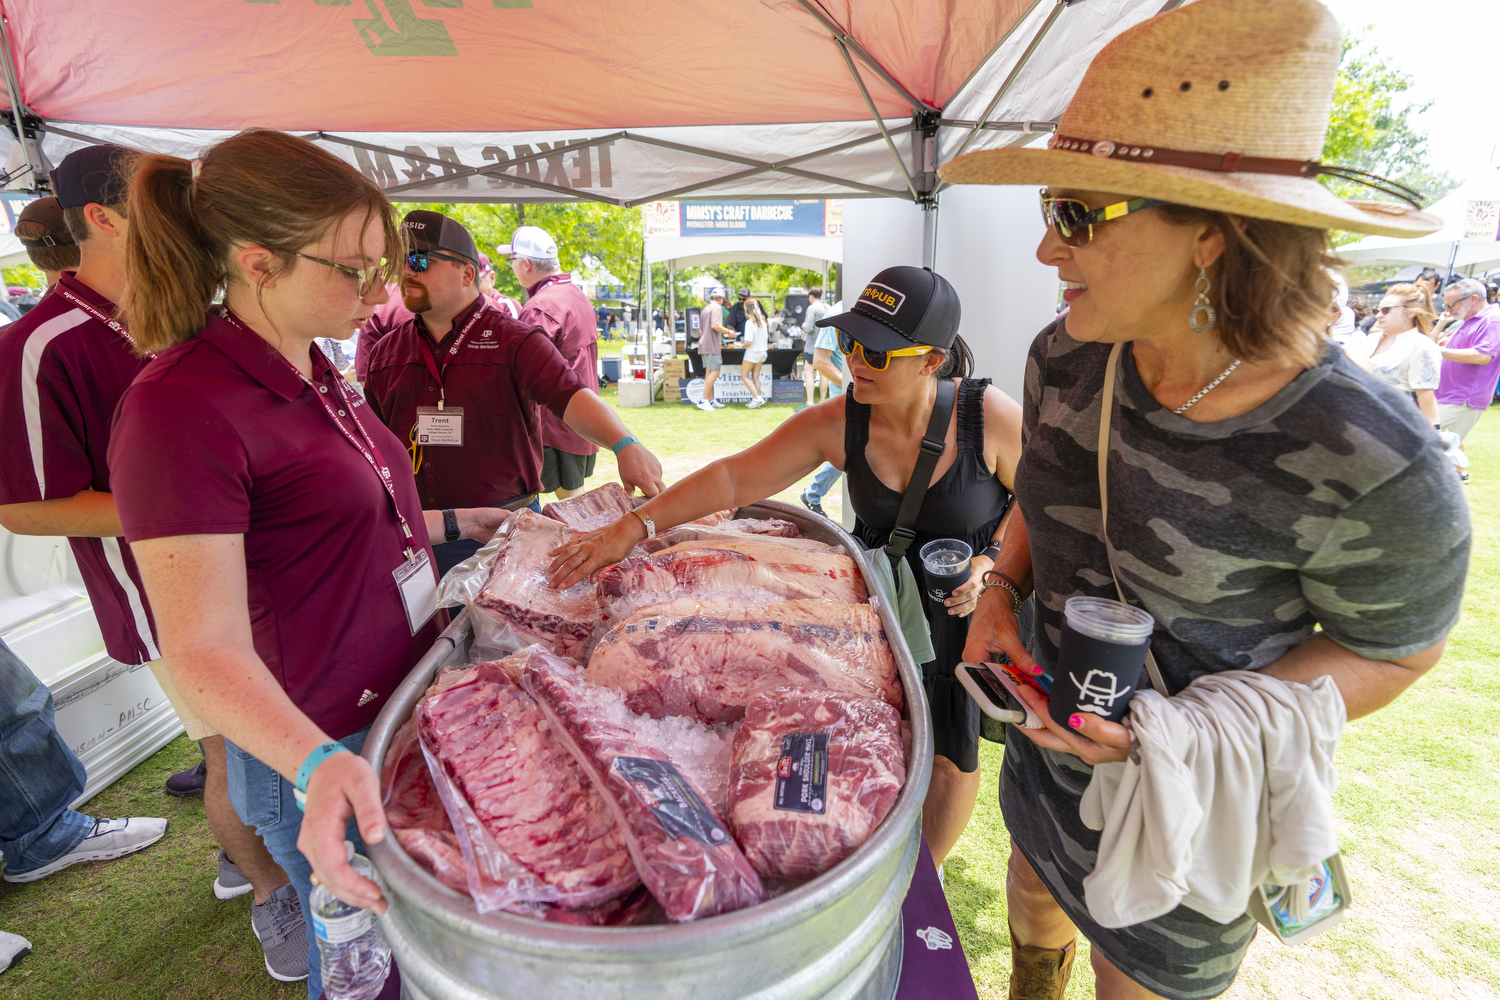 Students explaining different cuts of meat for barbecue to guests during the Troubadour Festival